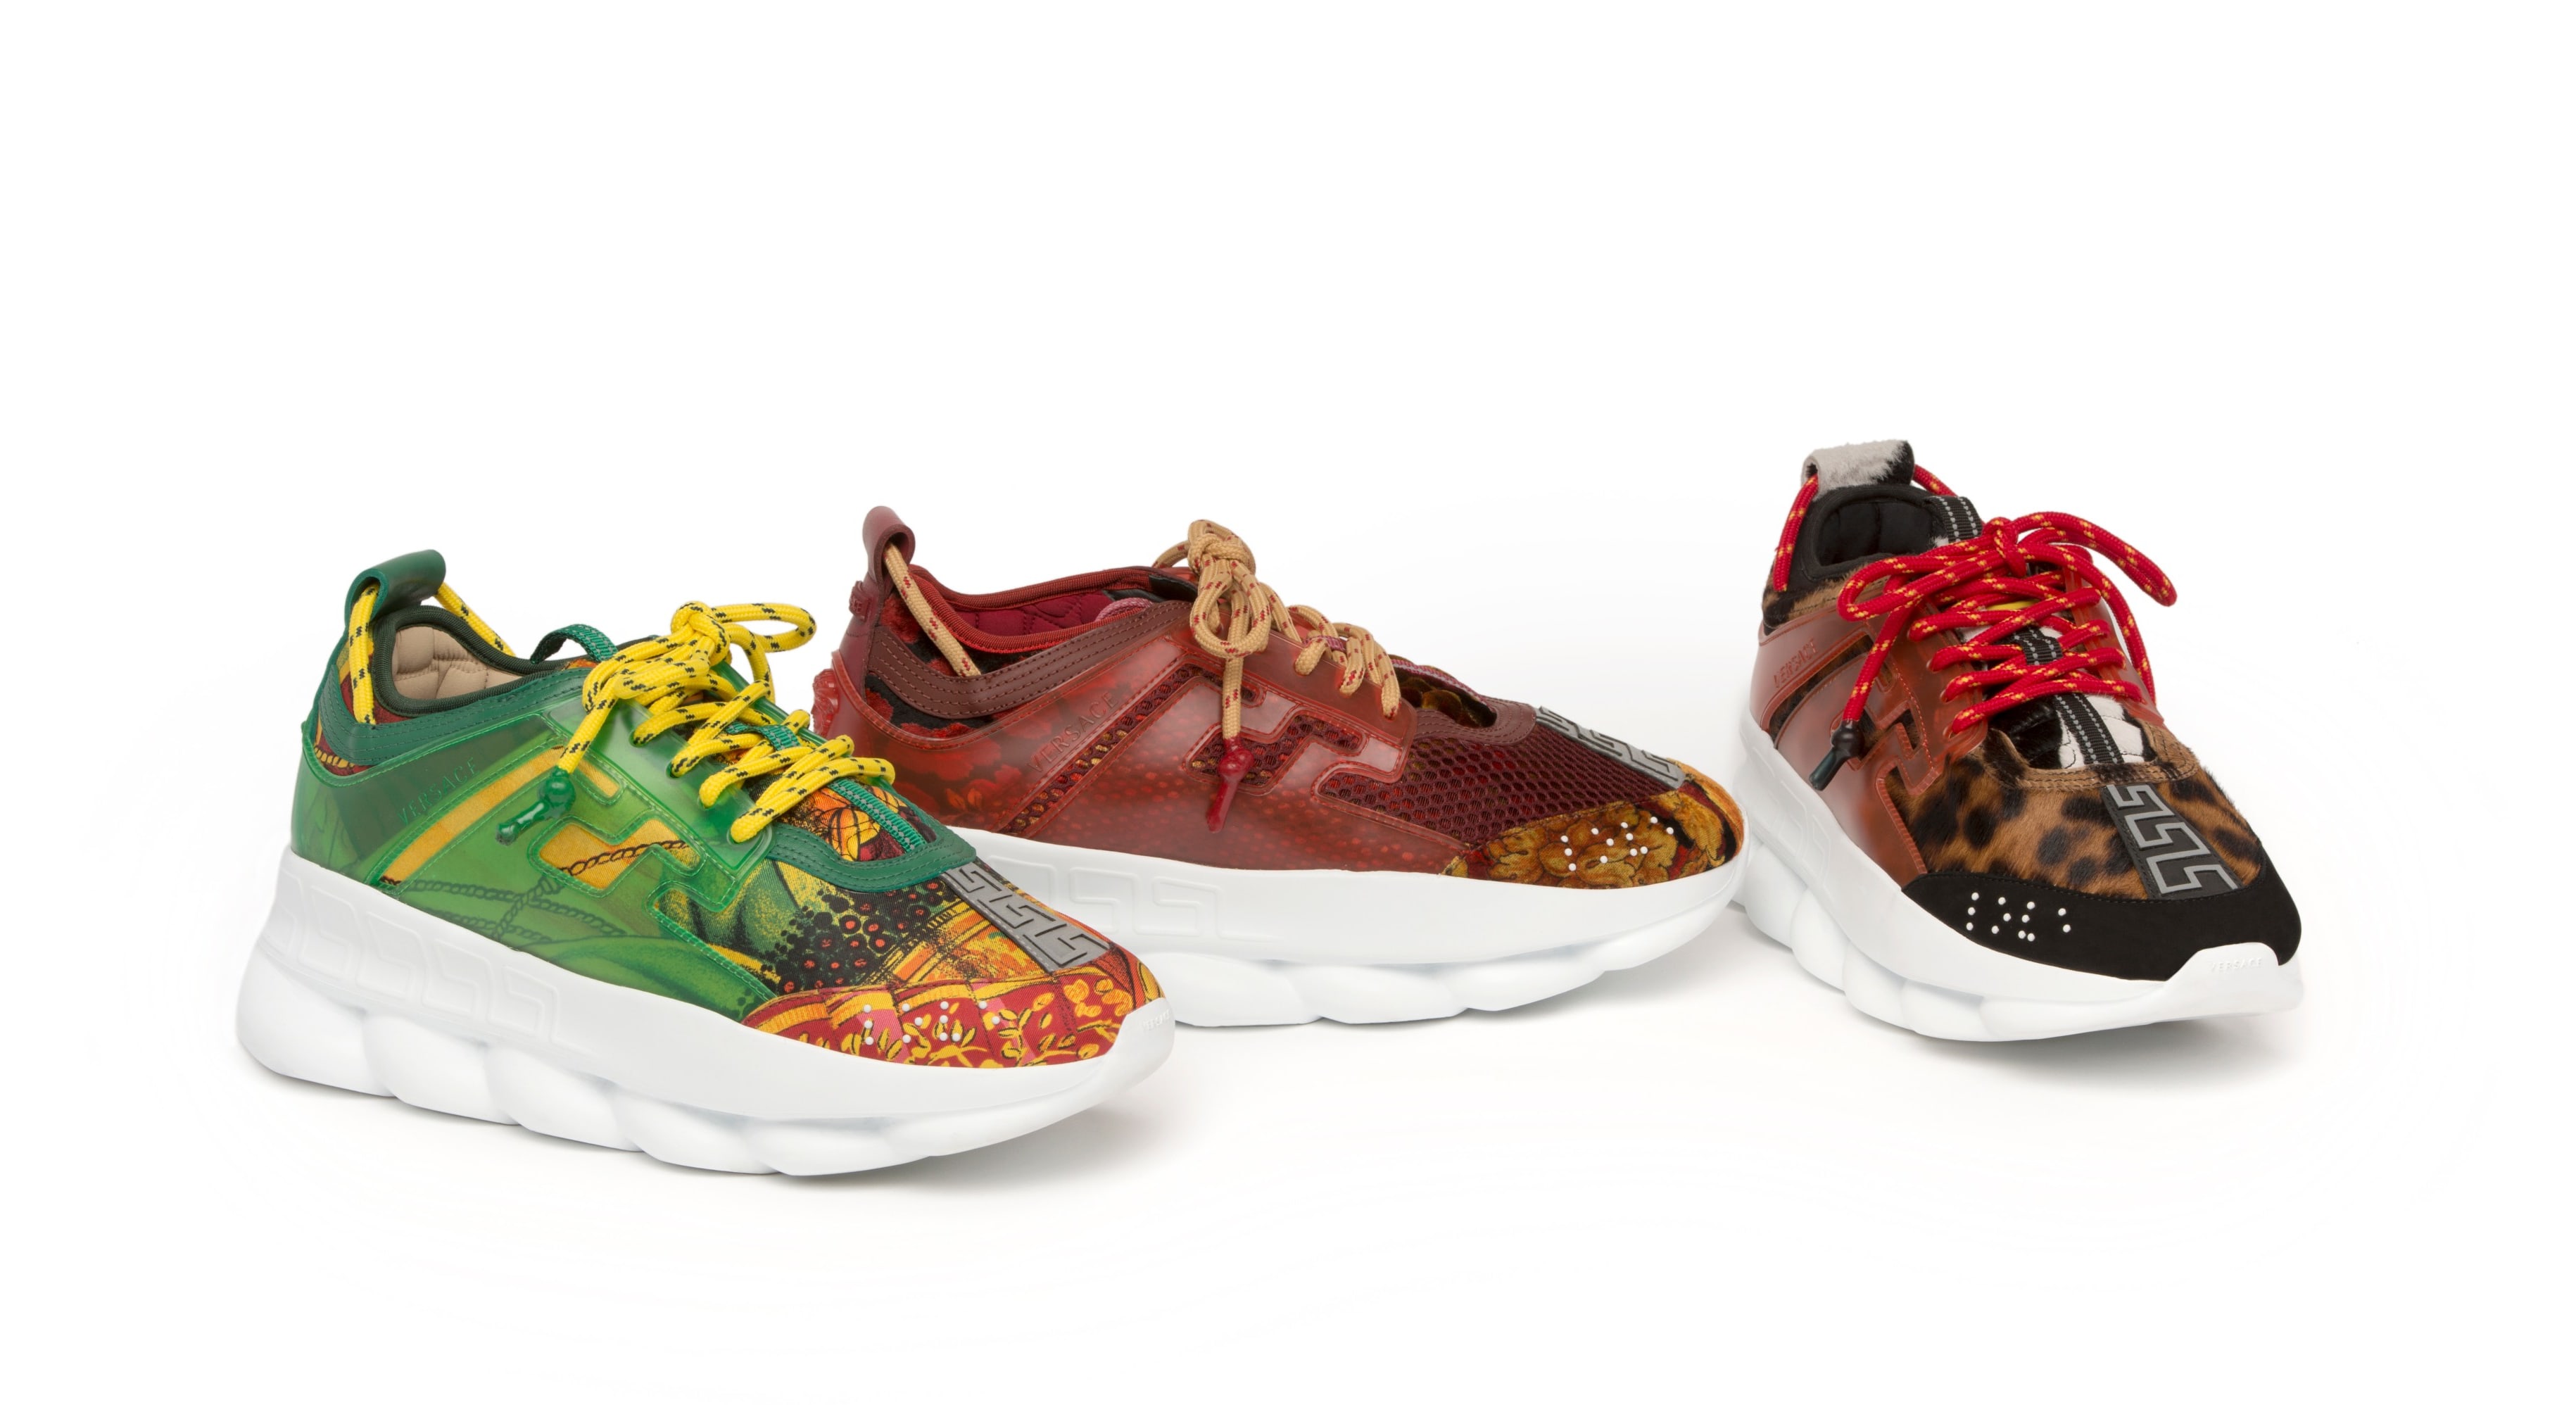 Versace Taps Goat to Sell Chain Reaction Sneaker – WWD